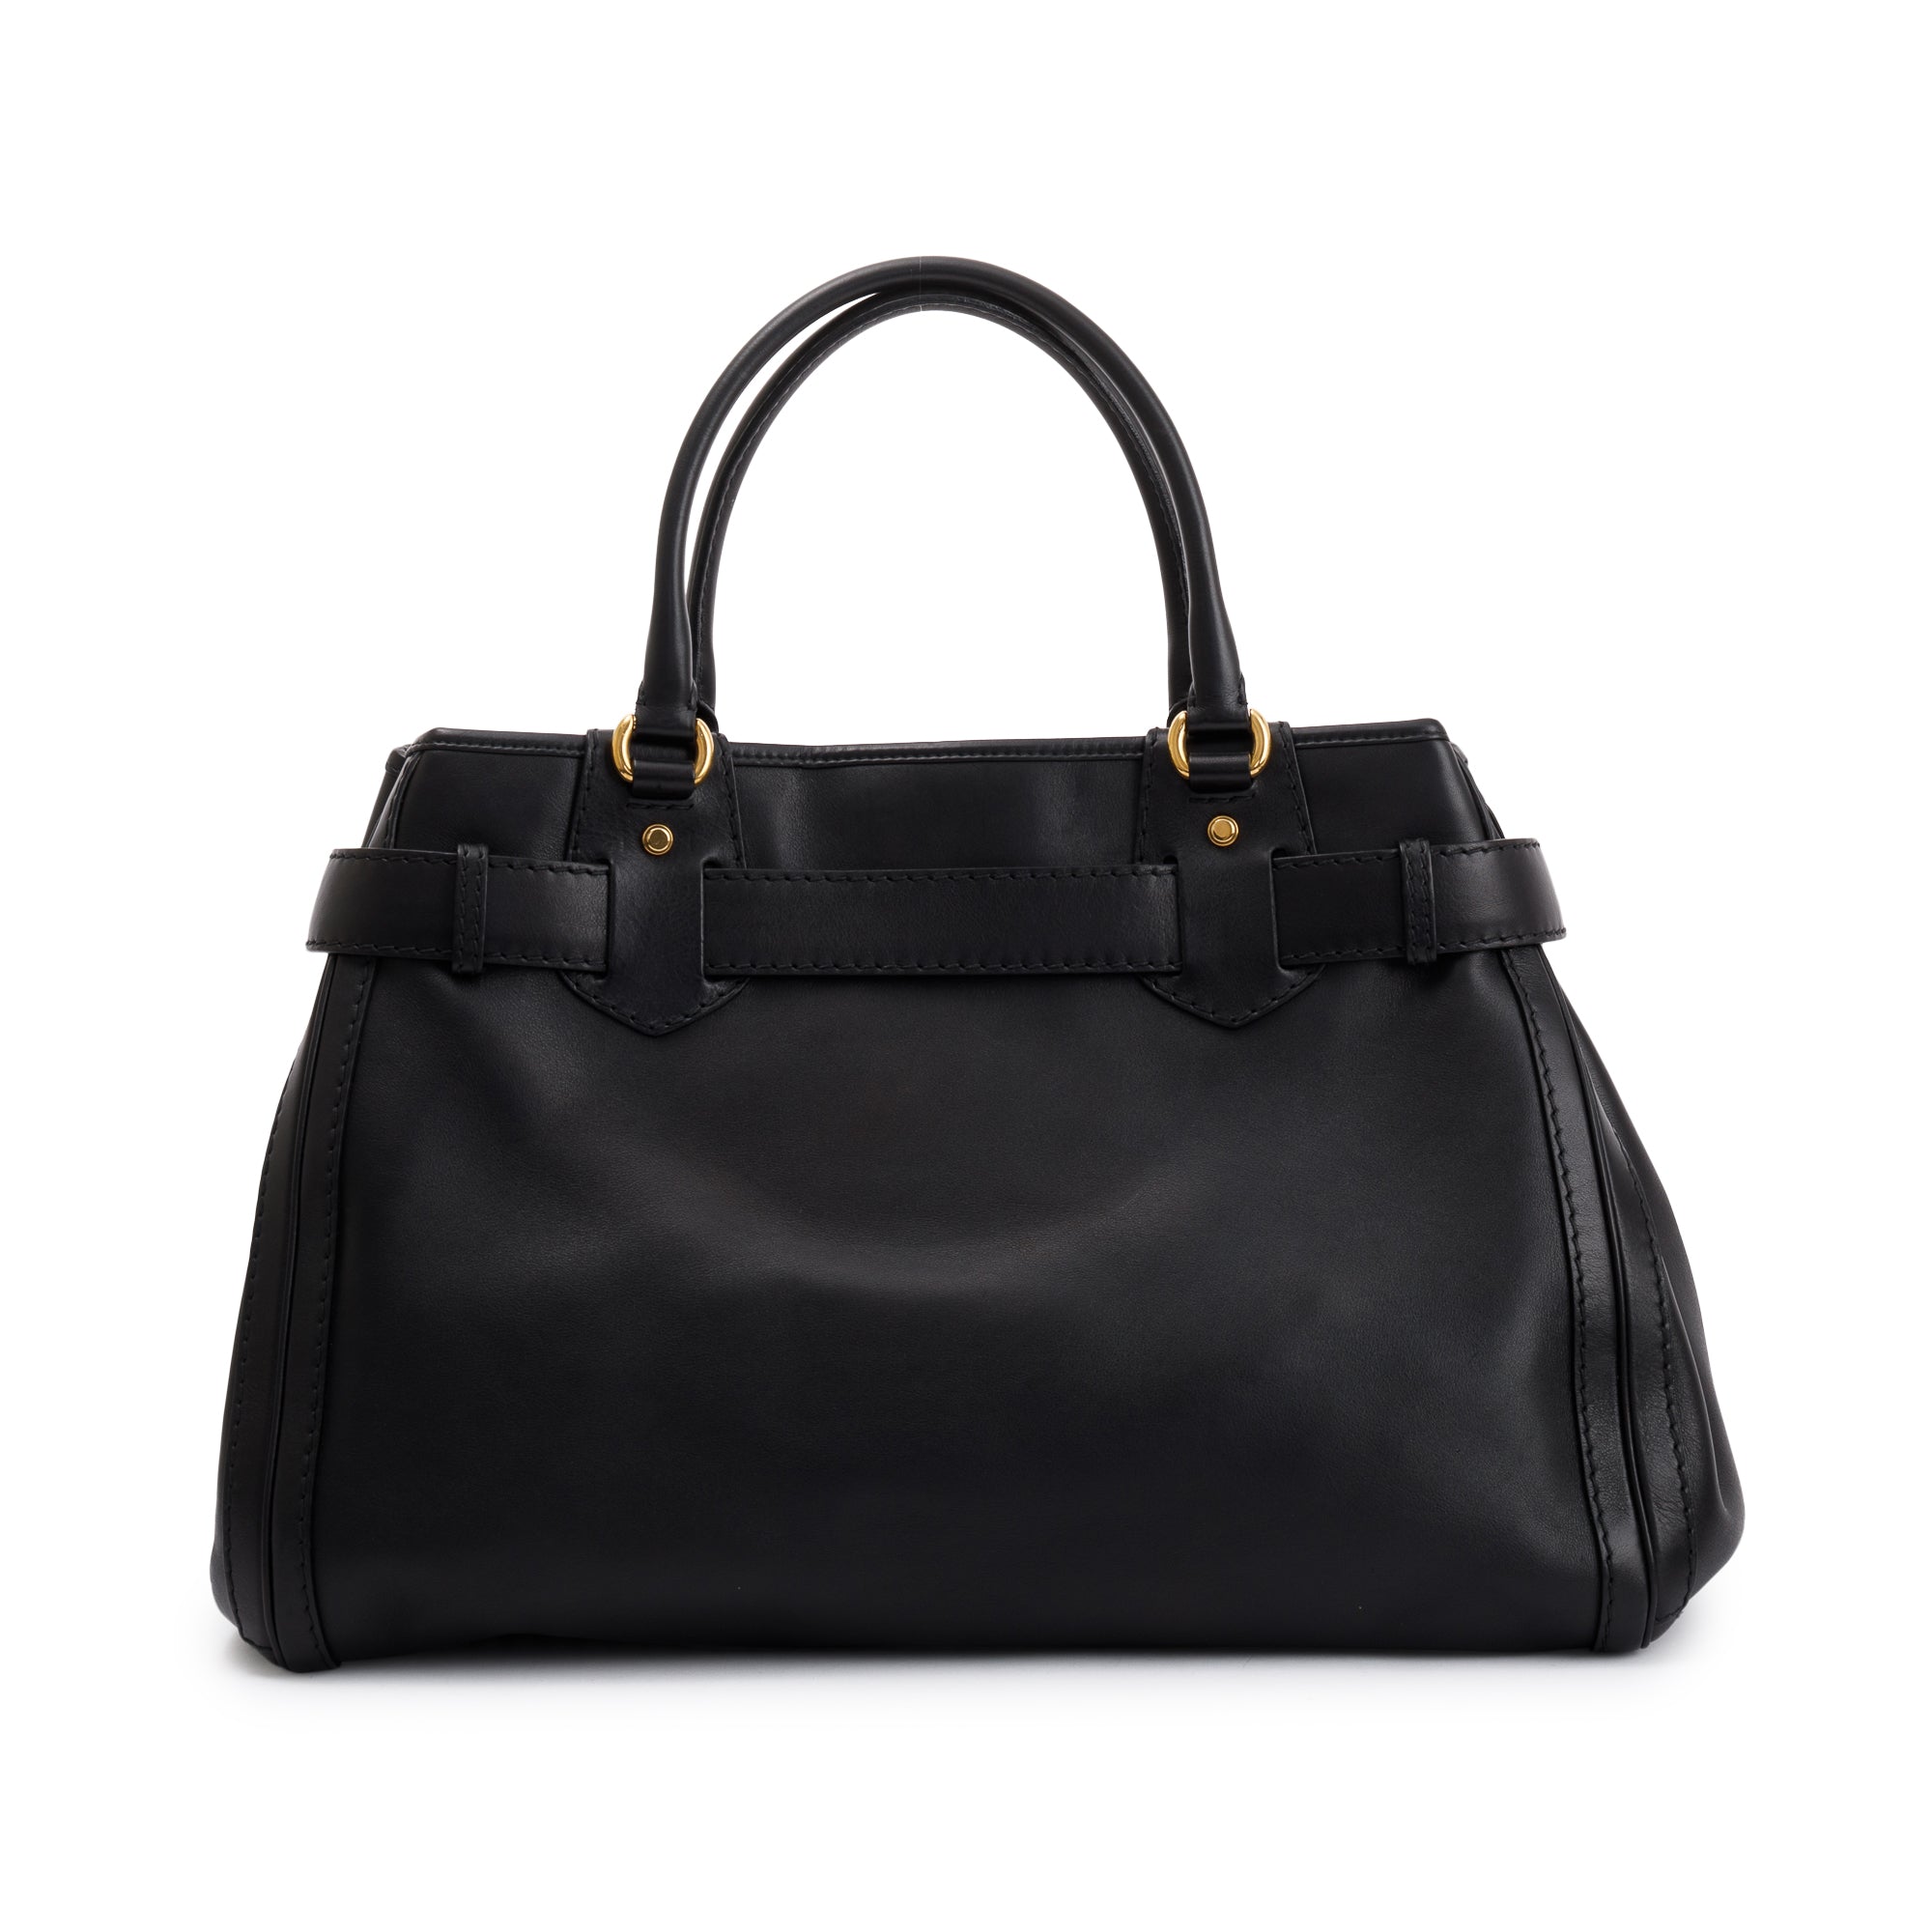 Gucci Black Leather Large GG Running Tote